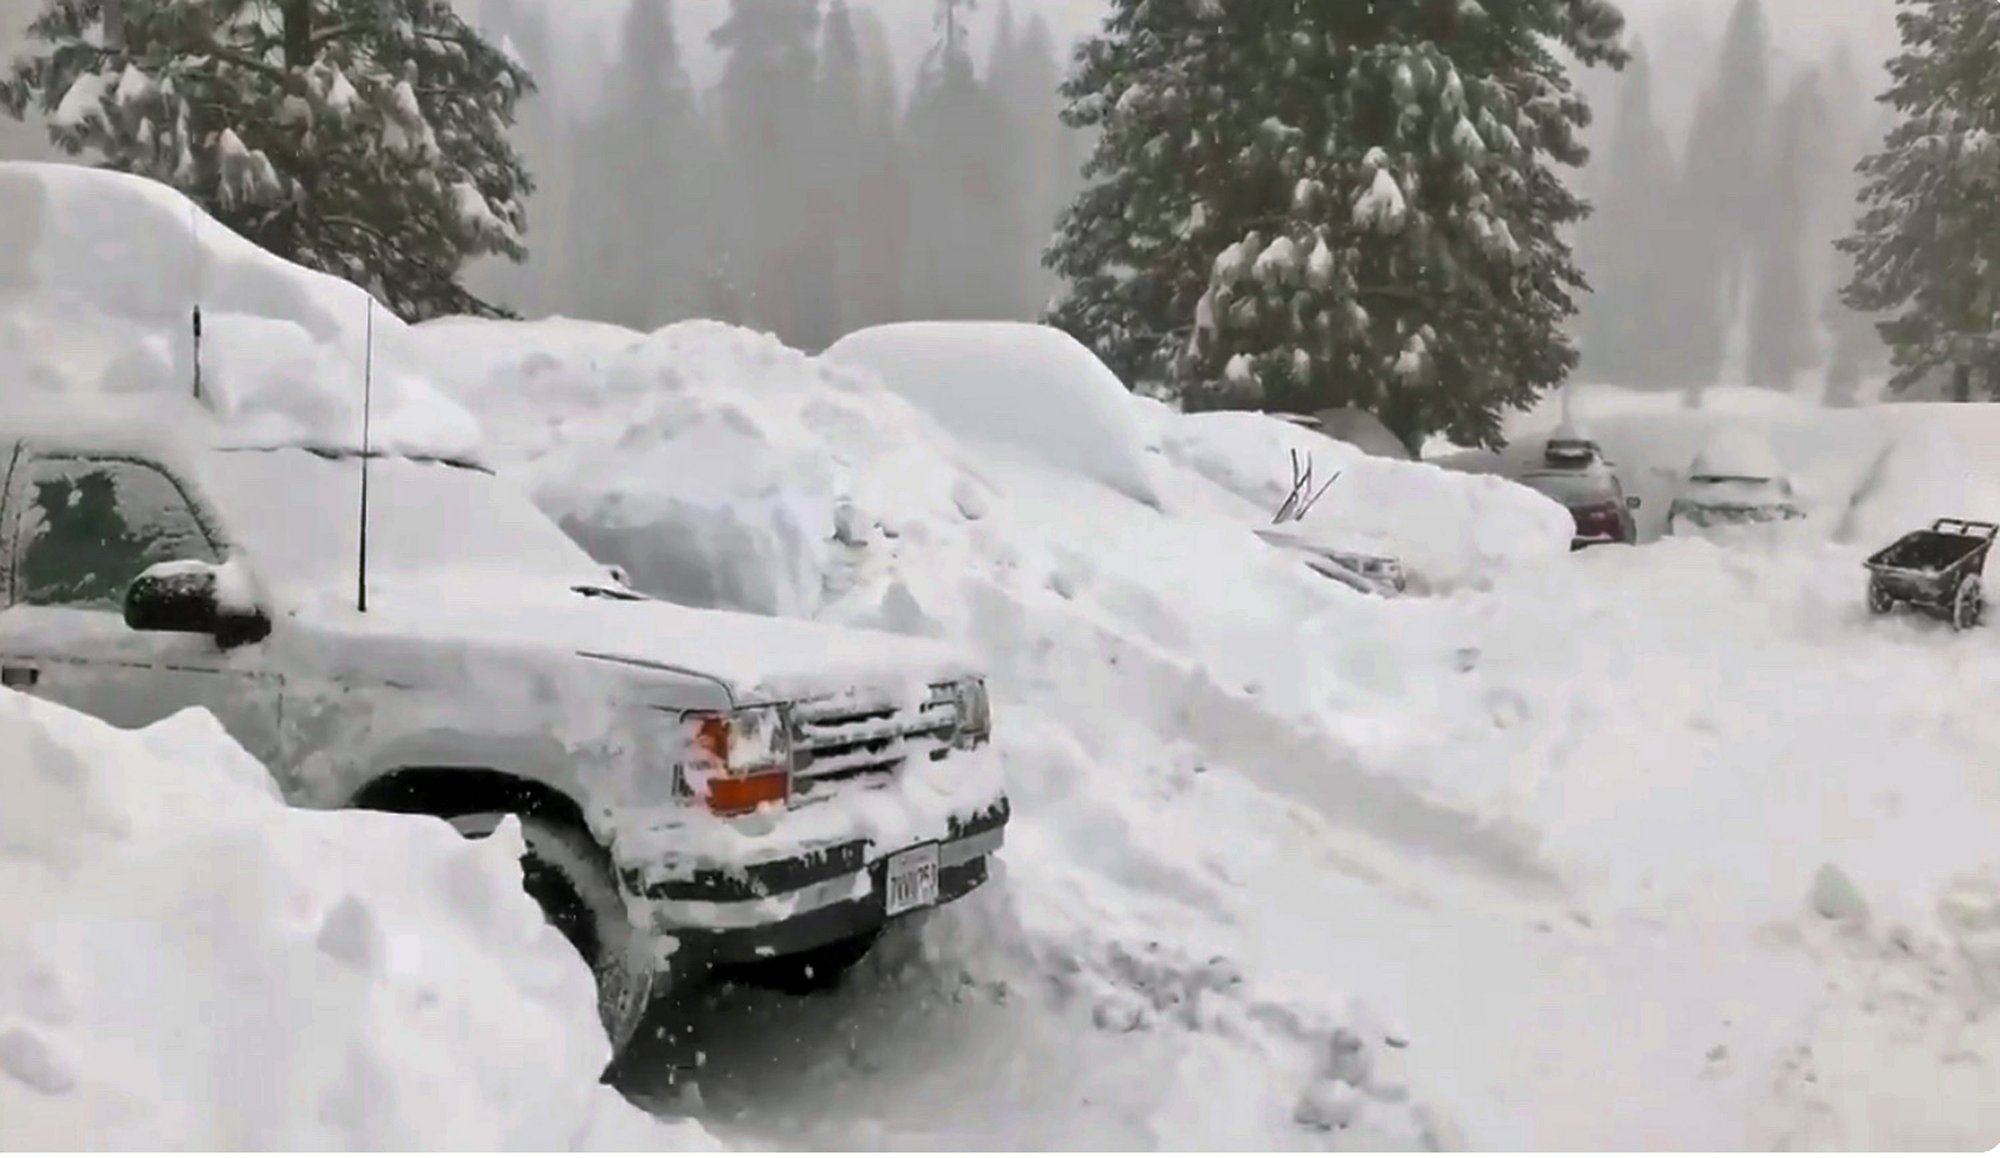 In California, the snow storm caught off guard 120 people, cutting them off from civilization